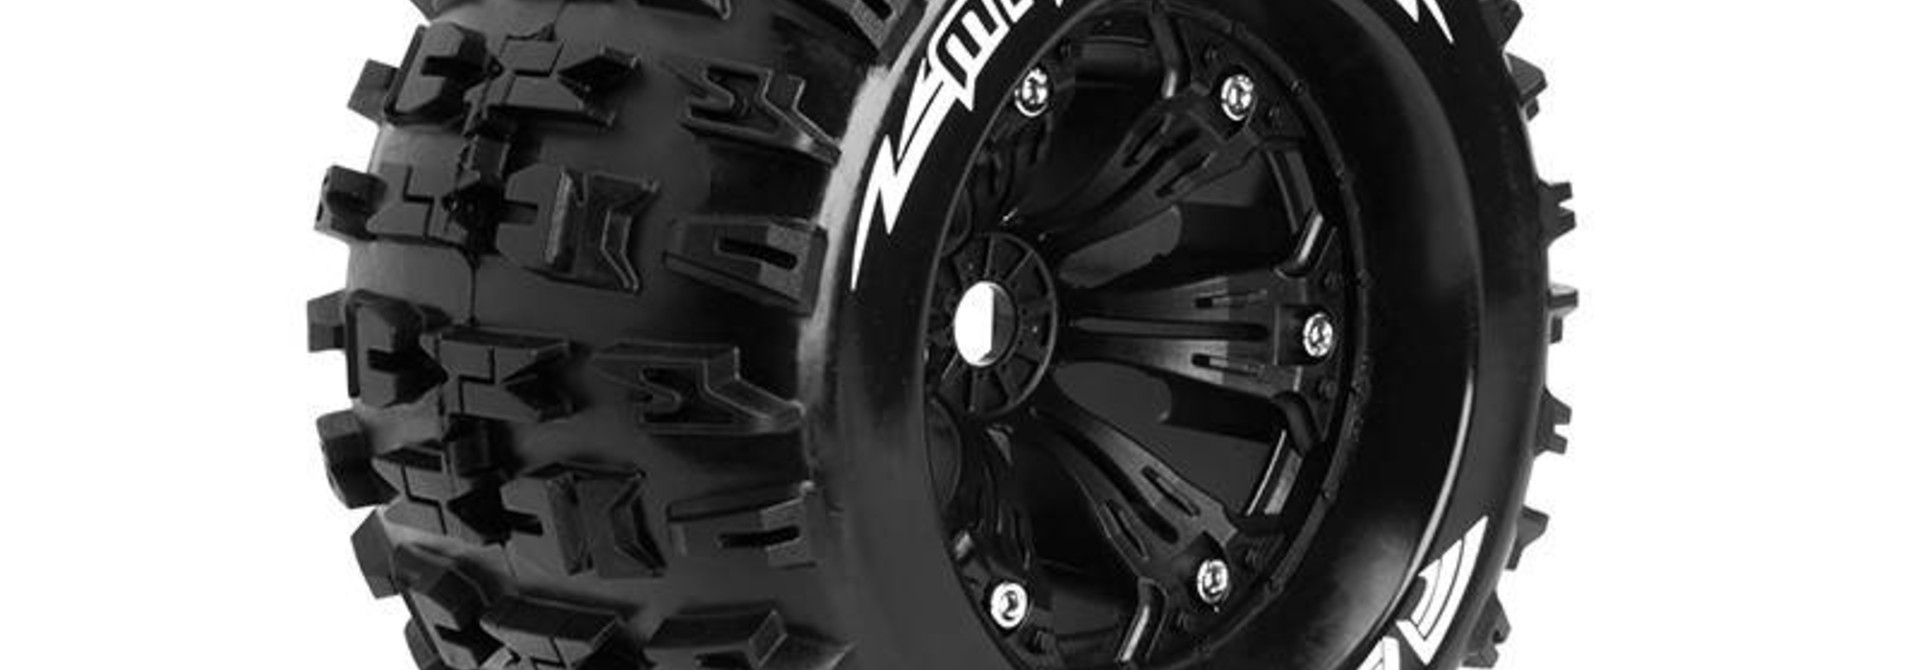 Louise RC - MT-PIONEER - 1-8 Monster Truck Tire Set - Mounted - Sport - Black 3.8 Rims - 1/2-Offset - Hex 17mm - L-T3218BH